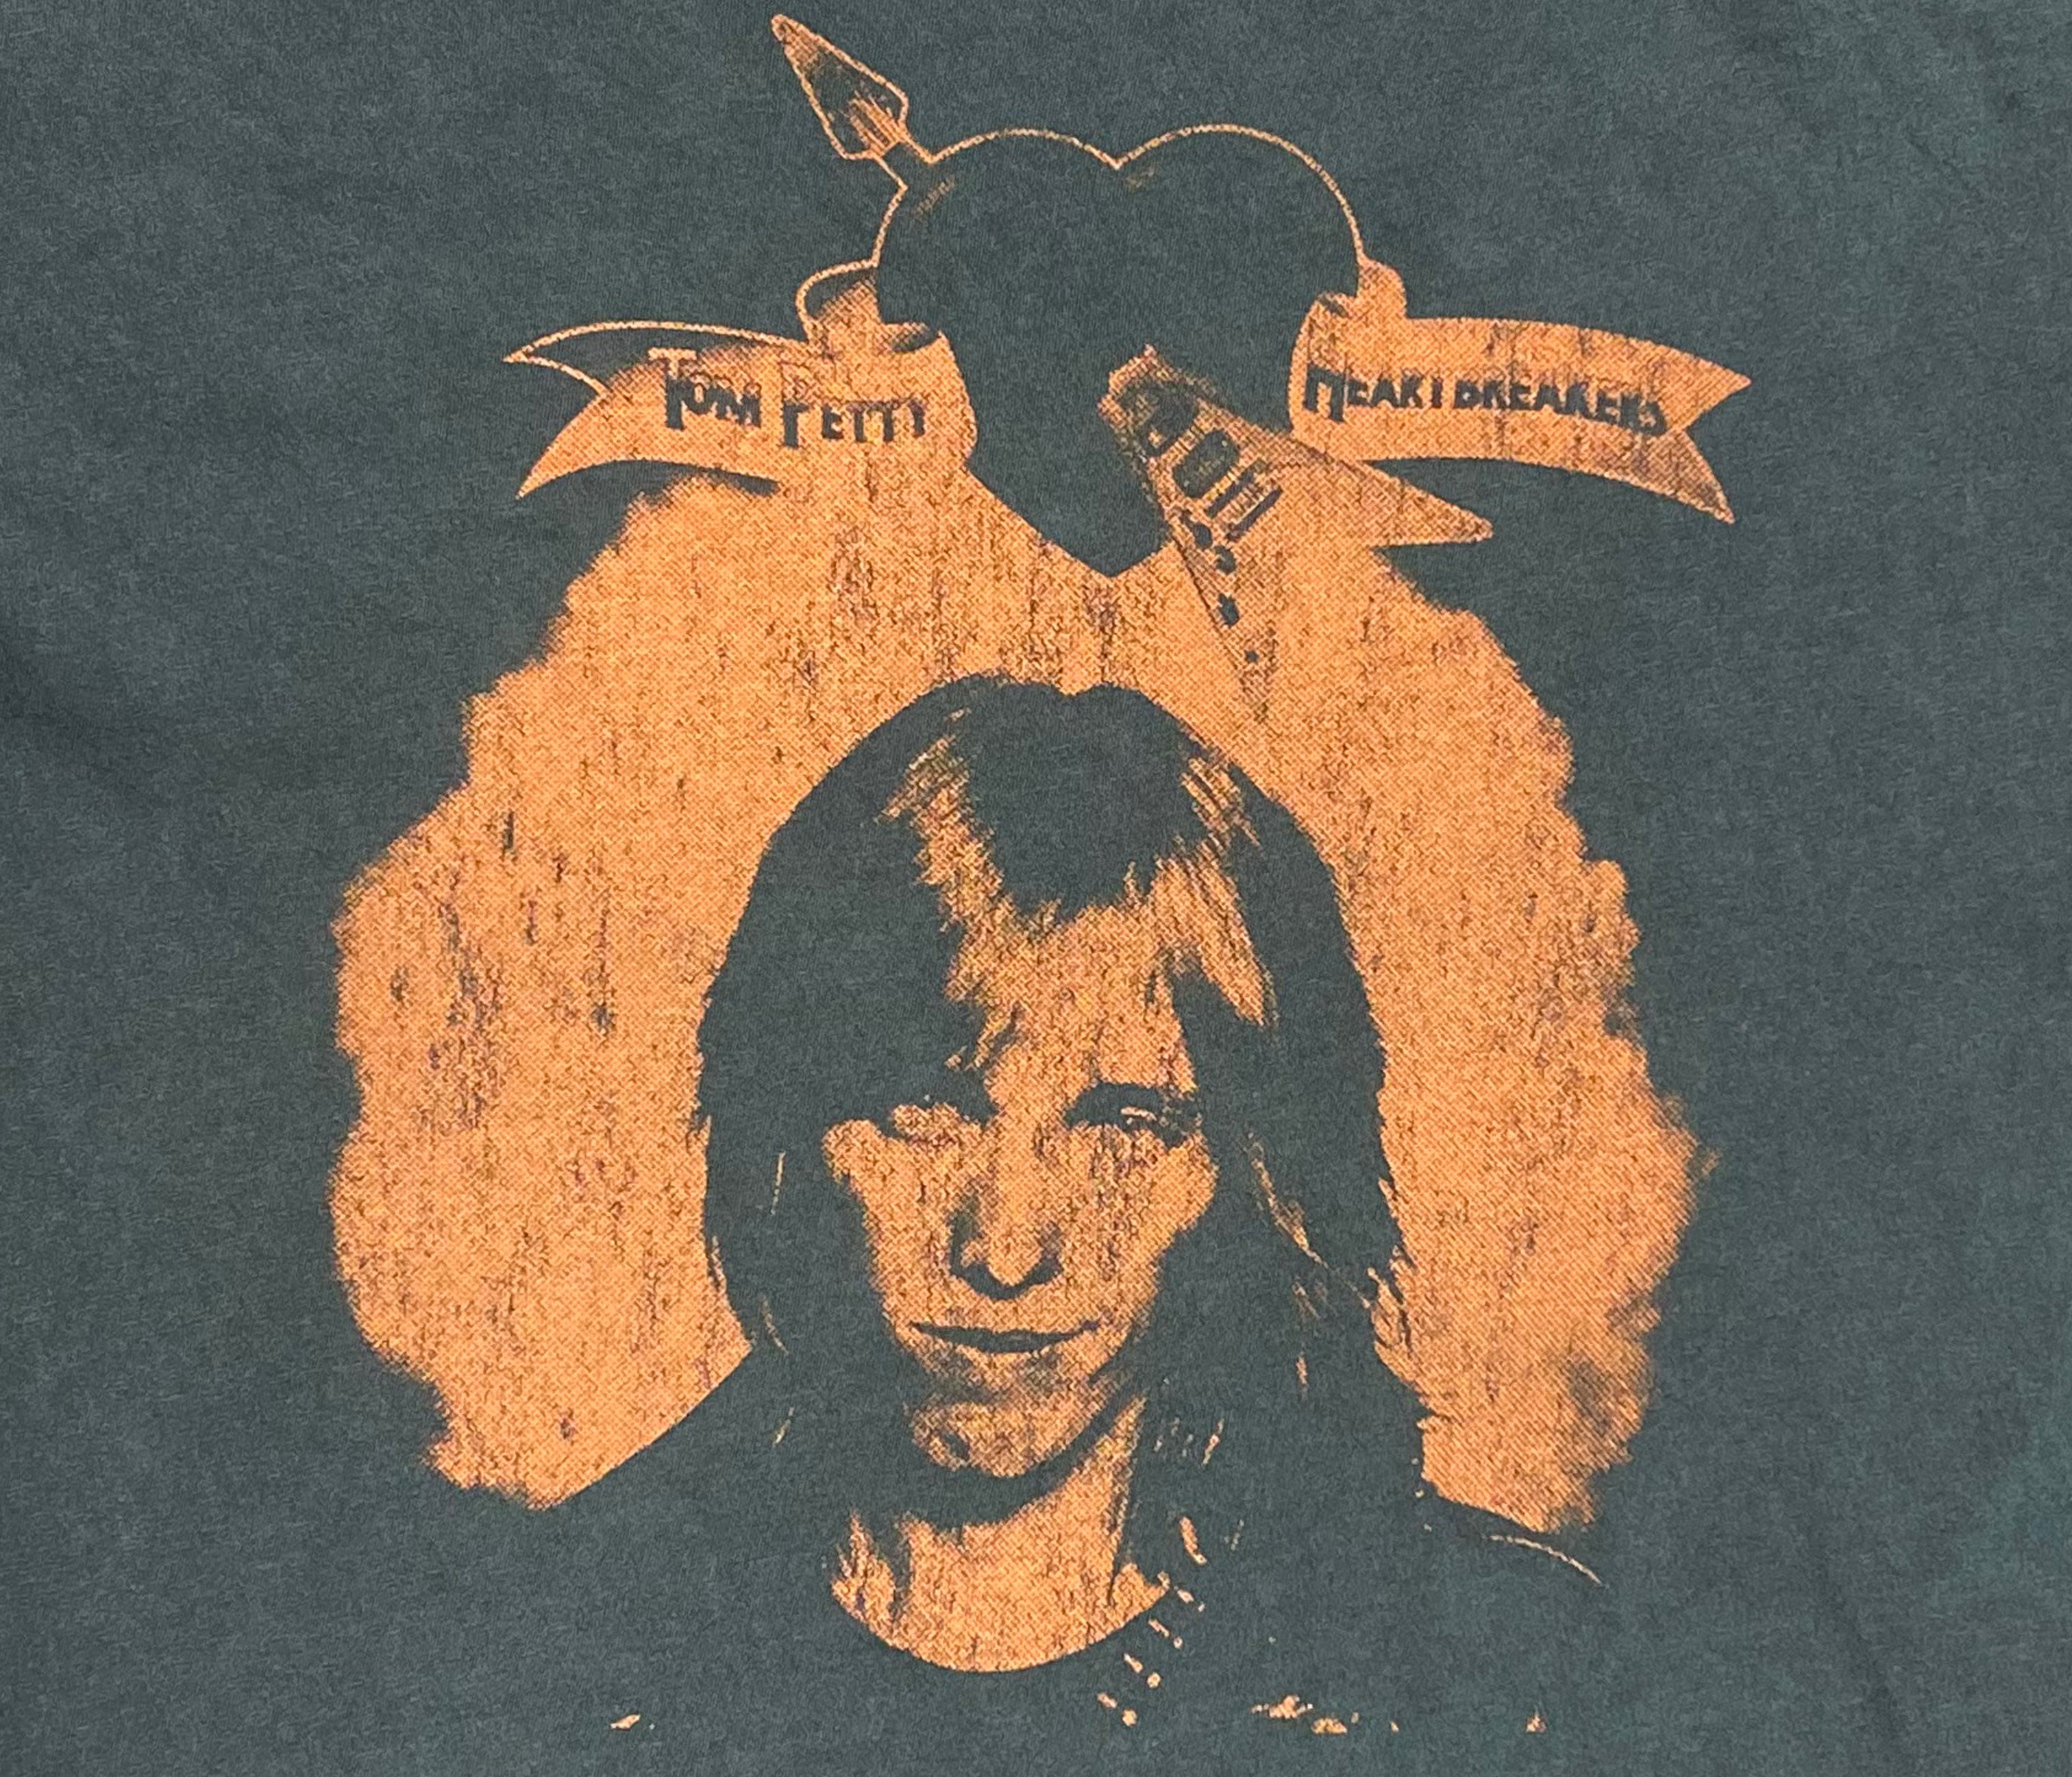 Tom Petty and The Heartbreakers at the Whiskey Cut off Crop Tee